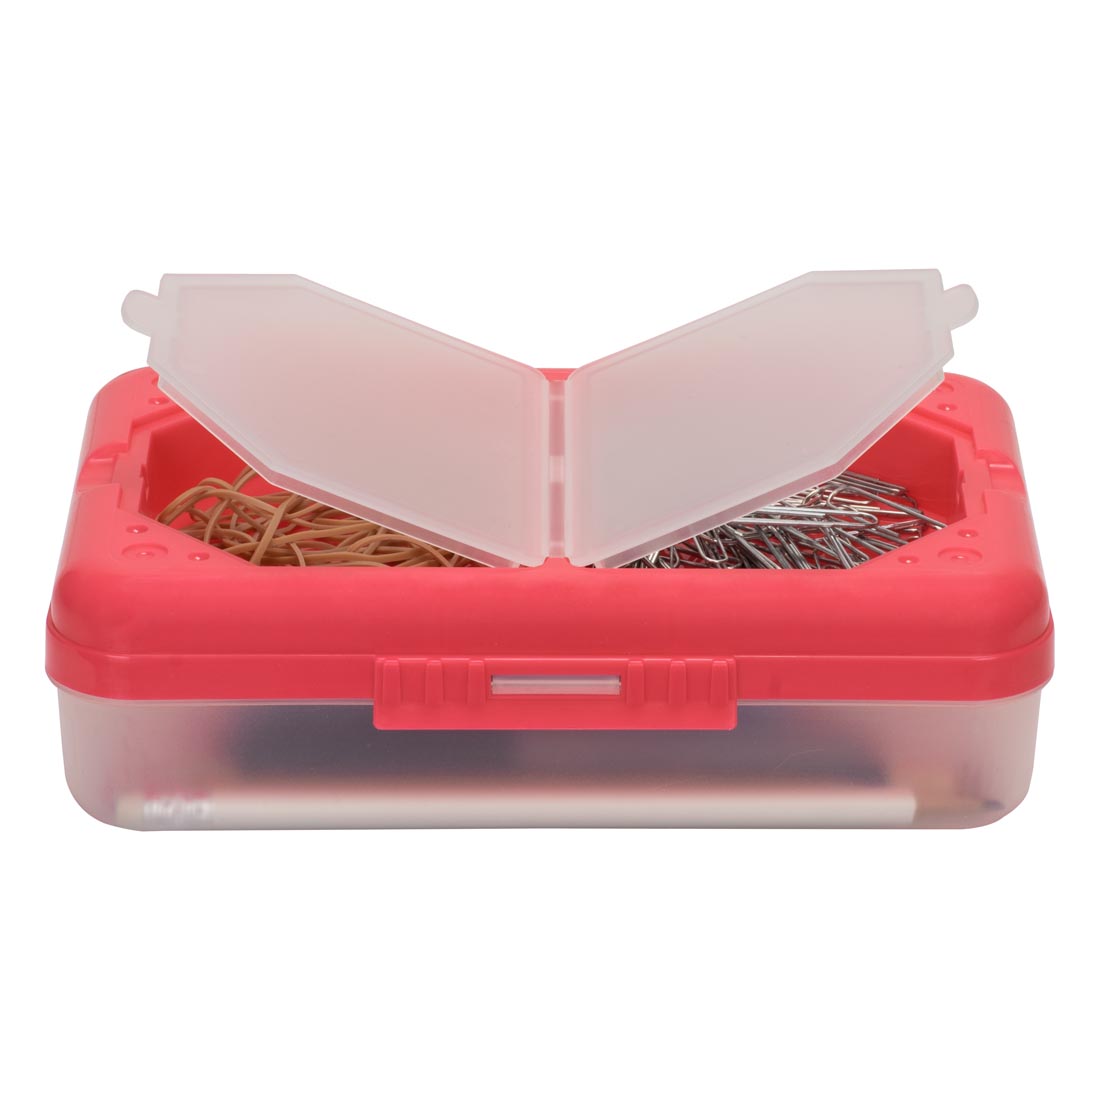 Storage box holding rubber bands, paper clips and pencils